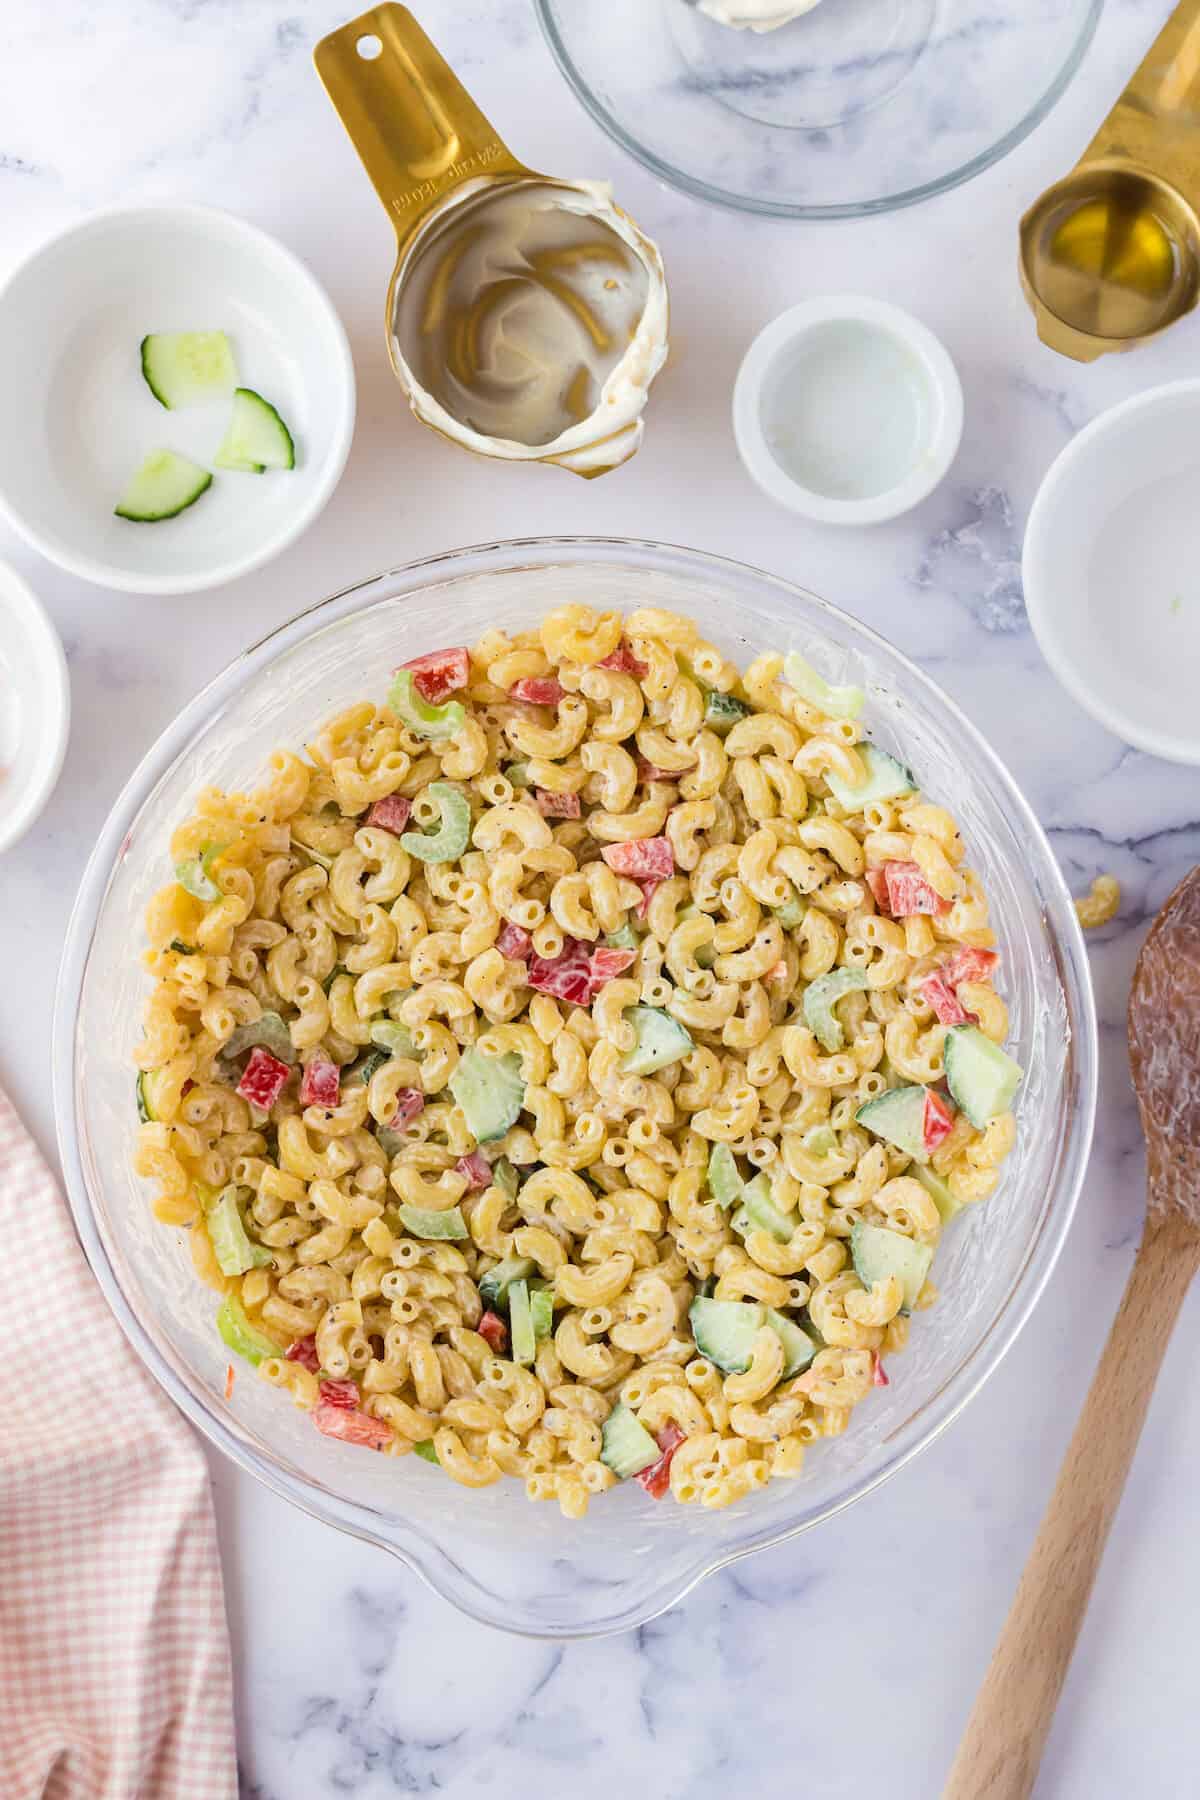 veggies and creamy sauce combined with the macaroni noodles.